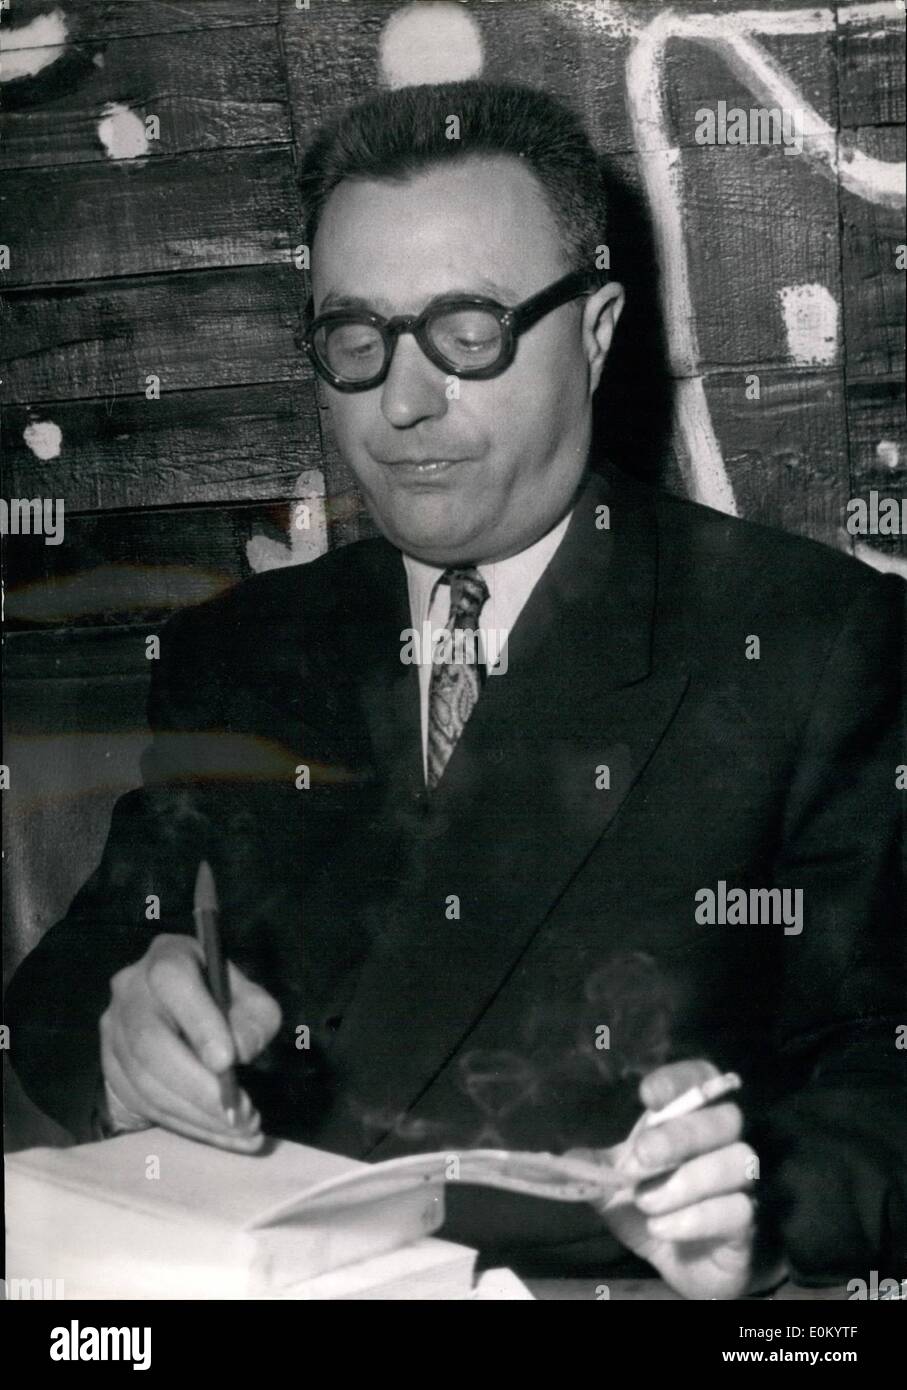 Dec. 12, 1952 - OFFICIAL GETS LITTERARY PRIZE FOR NOVEL MR. GOGER ROBINIAUX, SUB-PREFECT AT SAINT-FLOUR, WHP WAS AWARDED THE TABOU PRIZE FOR HIS NOVEL ''THE VIRTUES OF CRABON CRAGUES' Stock Photo